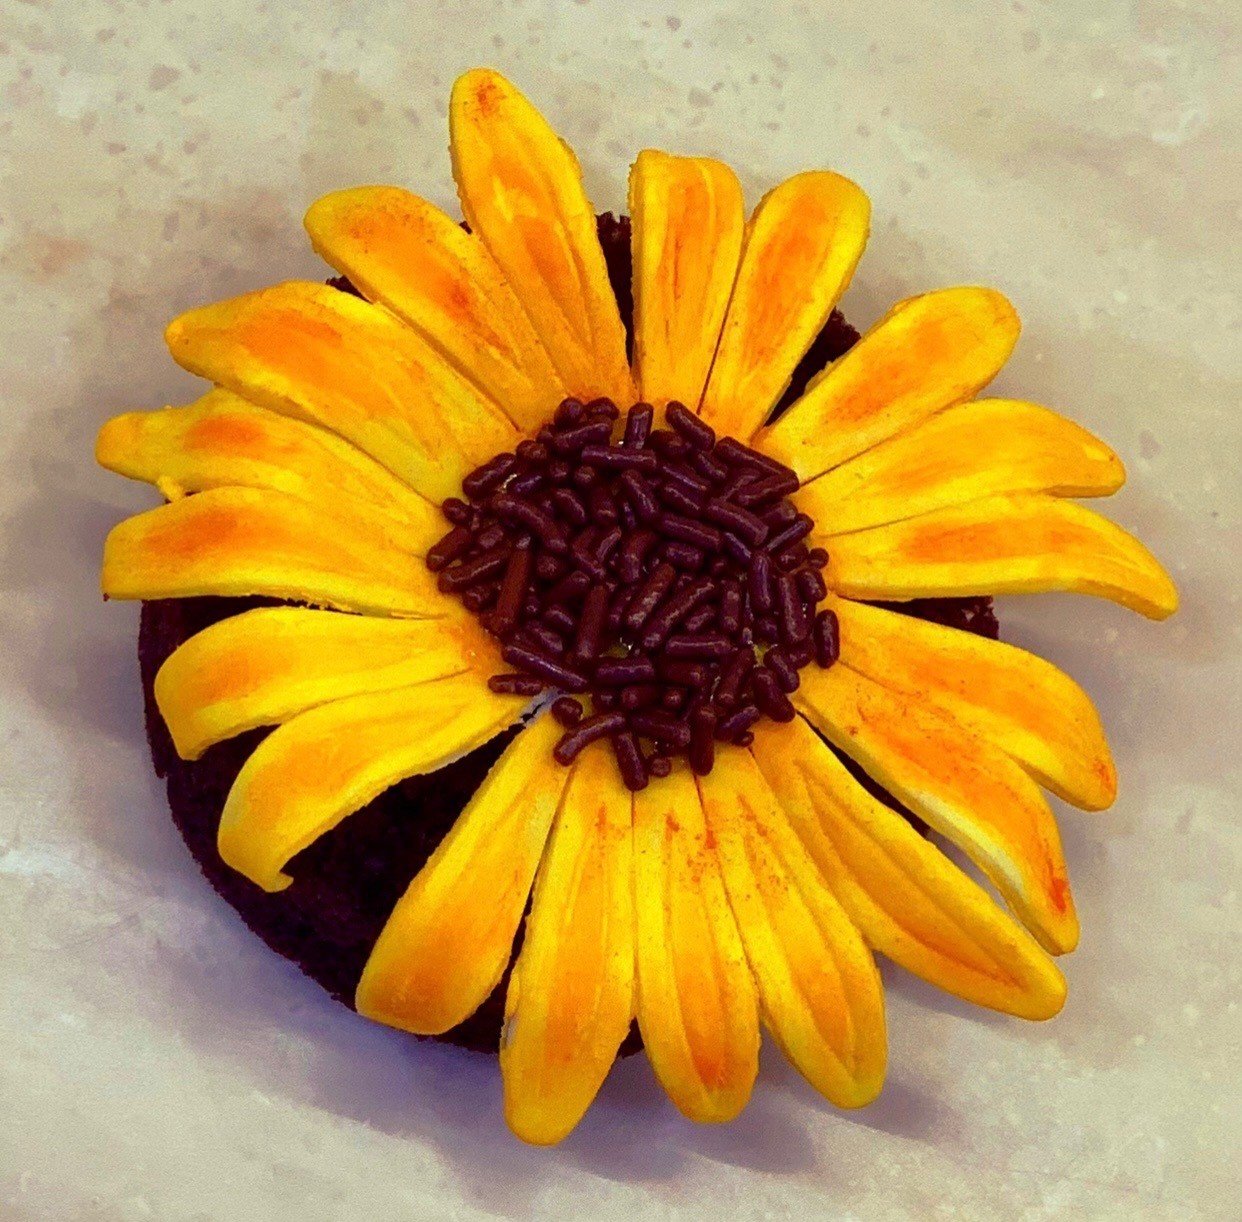 The completed sunflower brownies.